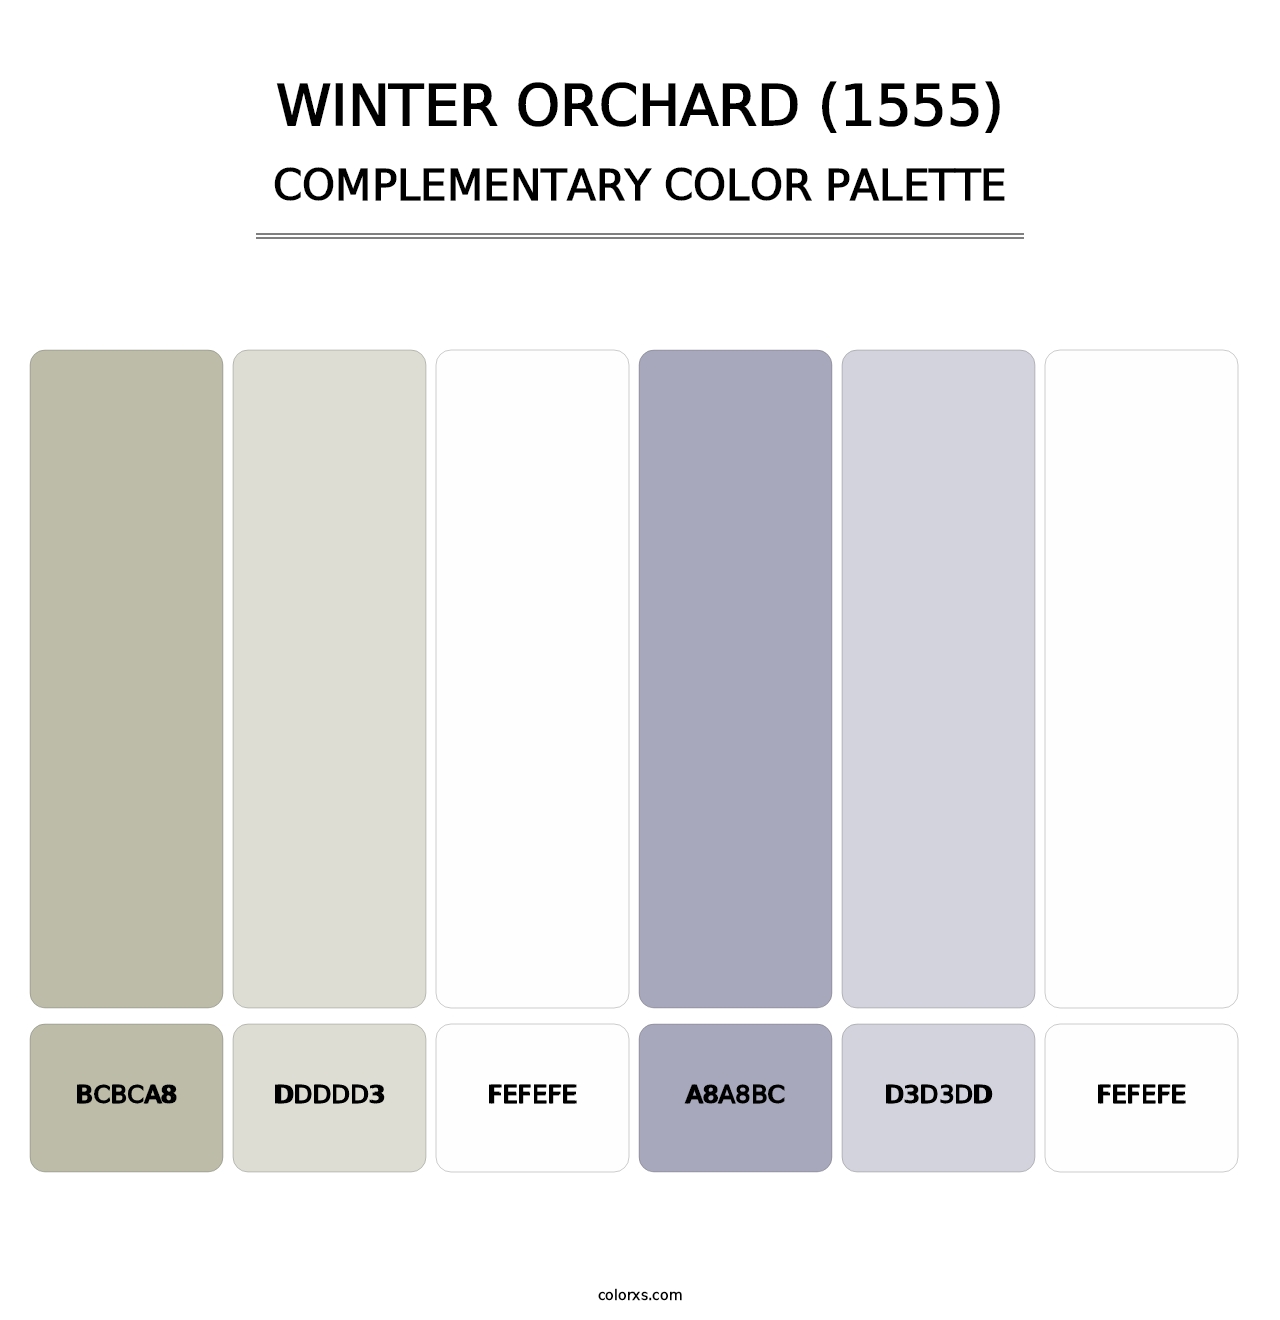 Winter Orchard (1555) - Complementary Color Palette